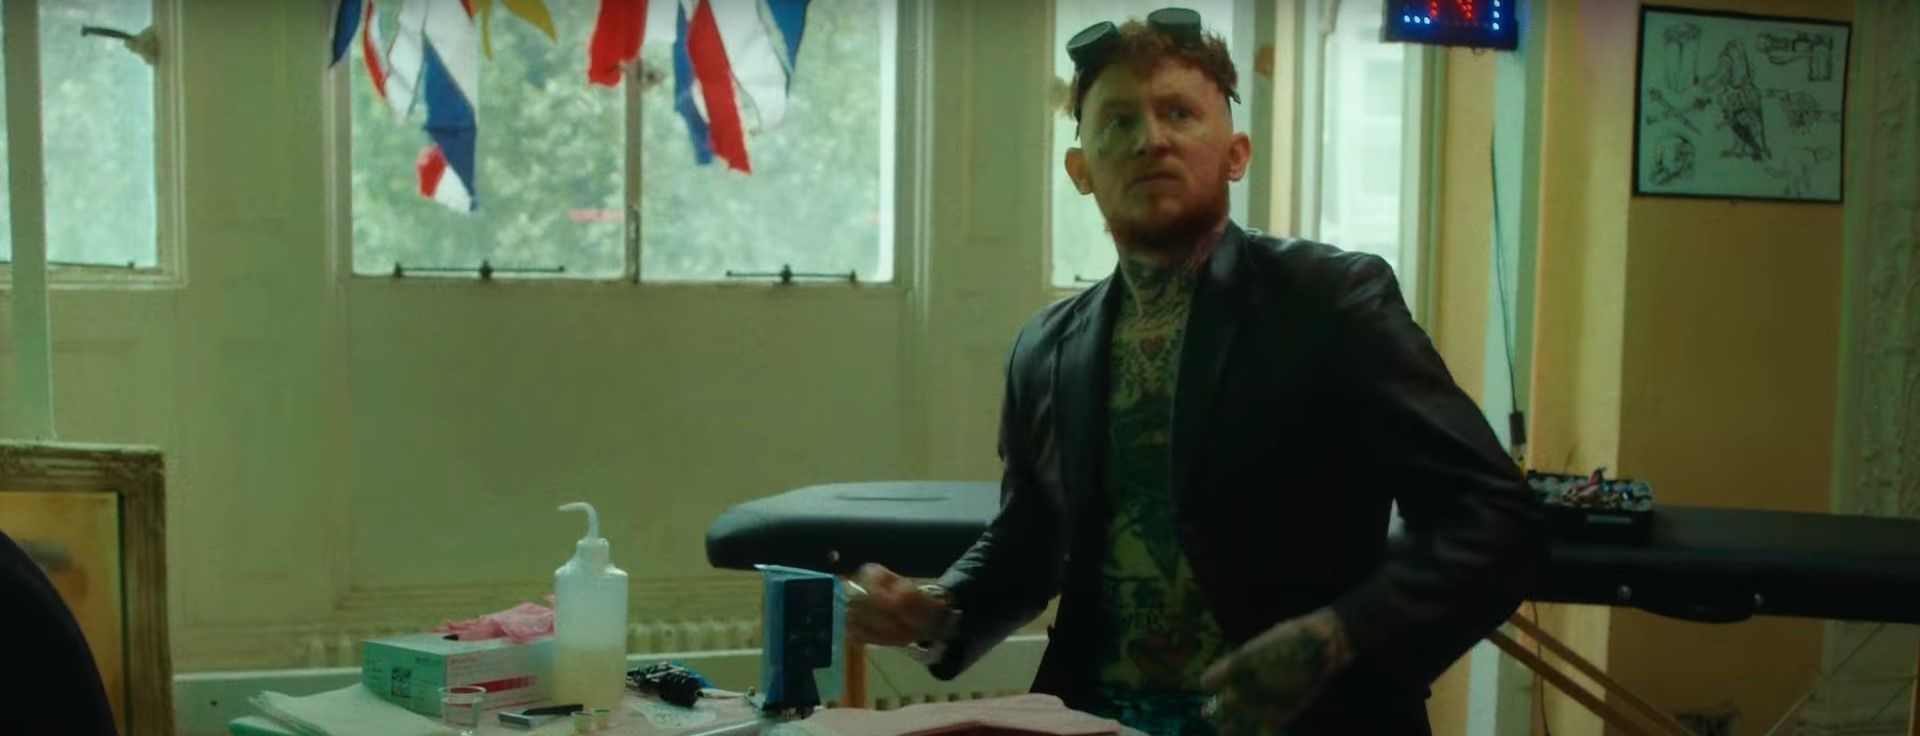 Frank Carter & The Rattlesnakes - Go Get A Tattoo (Official)